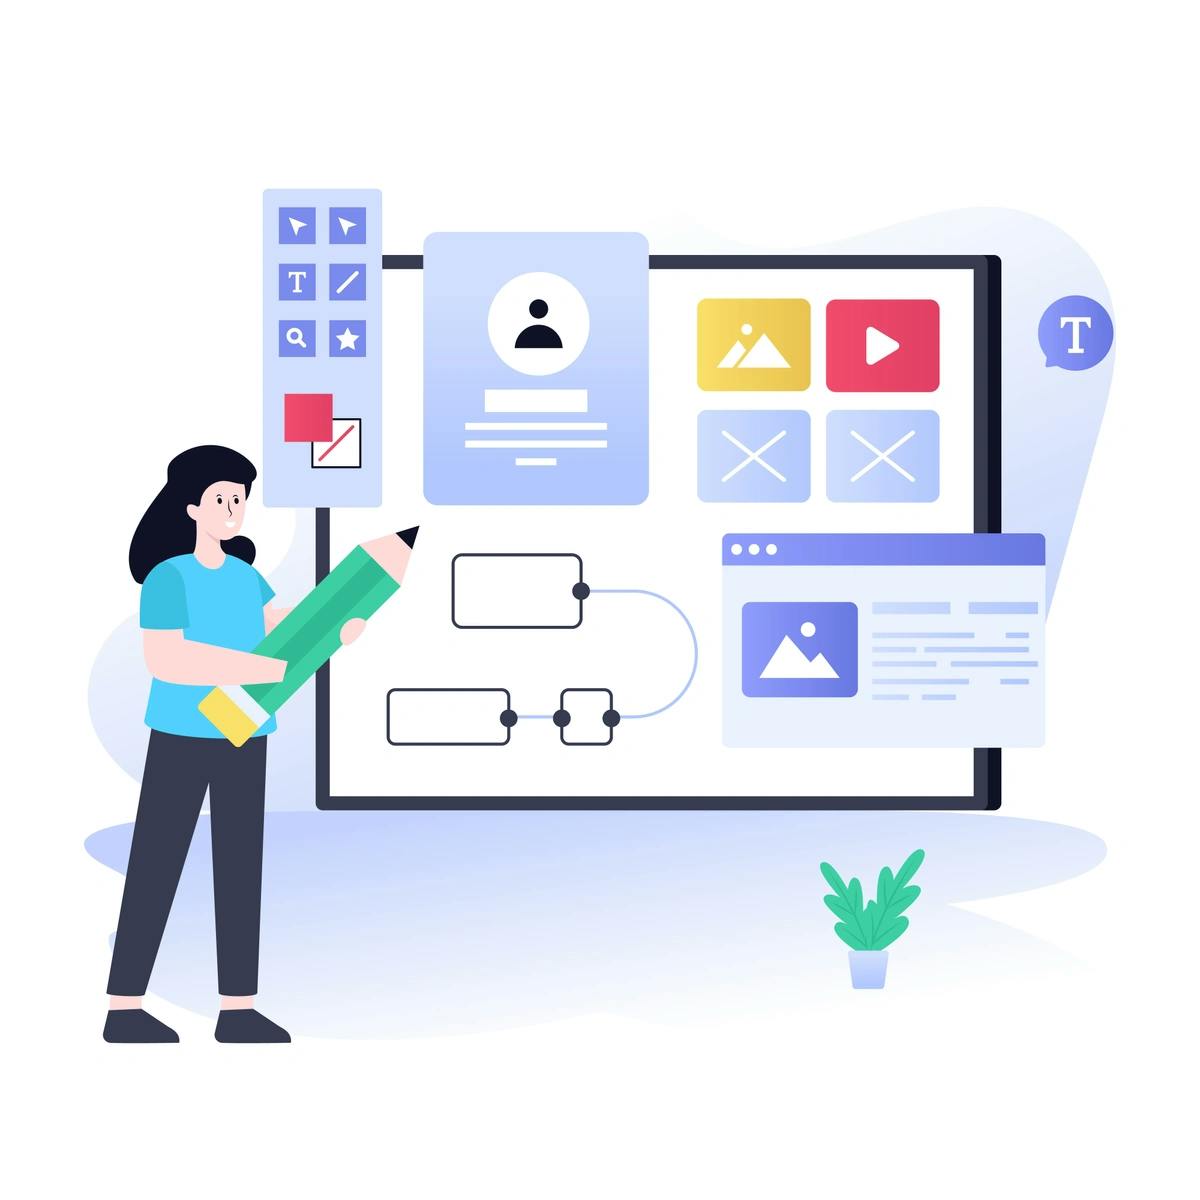 A flat design illustration of a female character holding a pencil next to a large display showing various user interface elements and wireframes, representing website or application design and development.